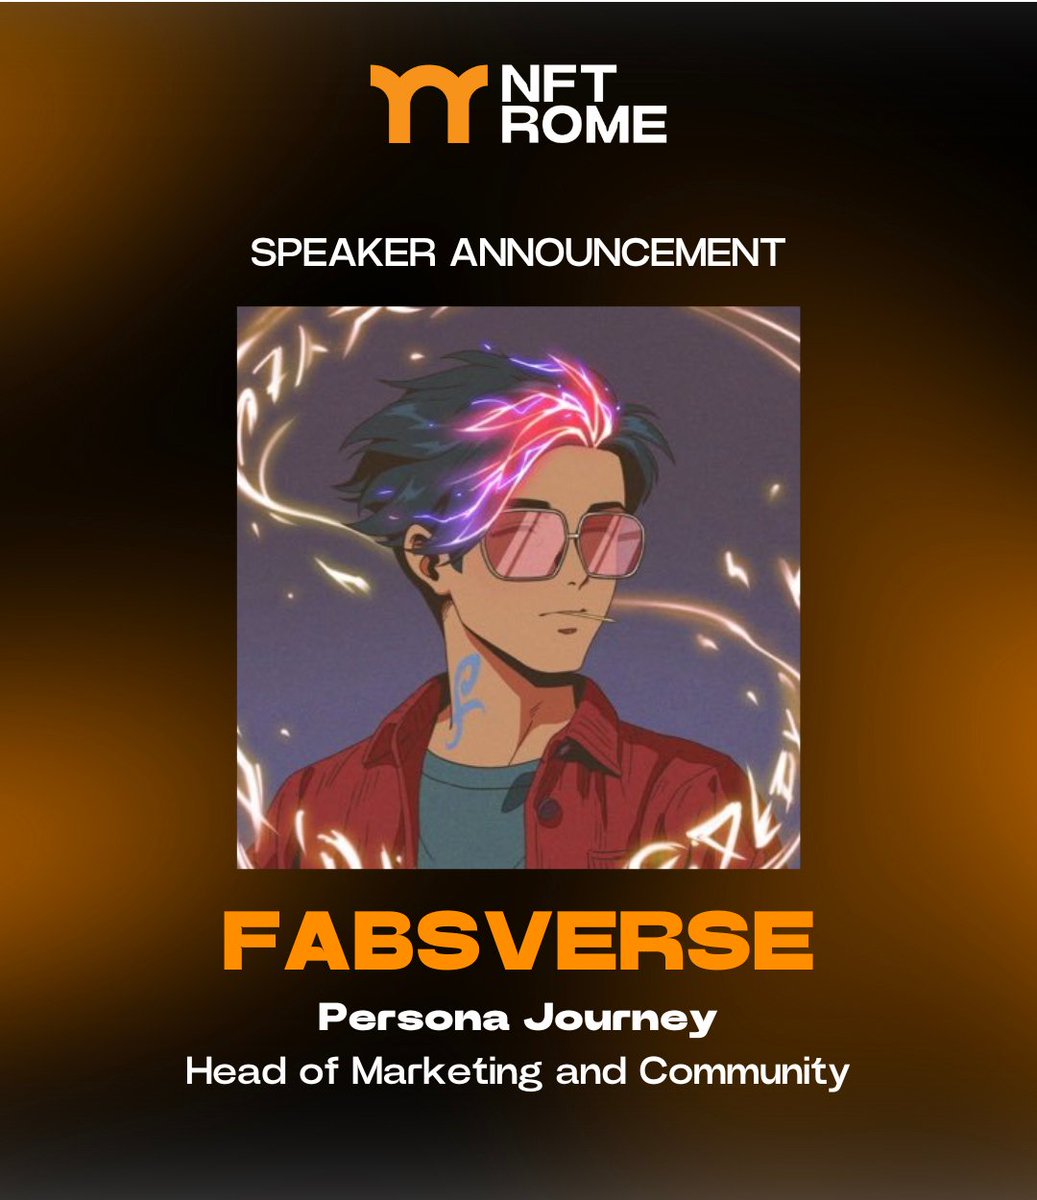 Speaker Announcement @fabsverseNFT, Marketing & Community at Persona Journey, will be speaking at NFT Rome.